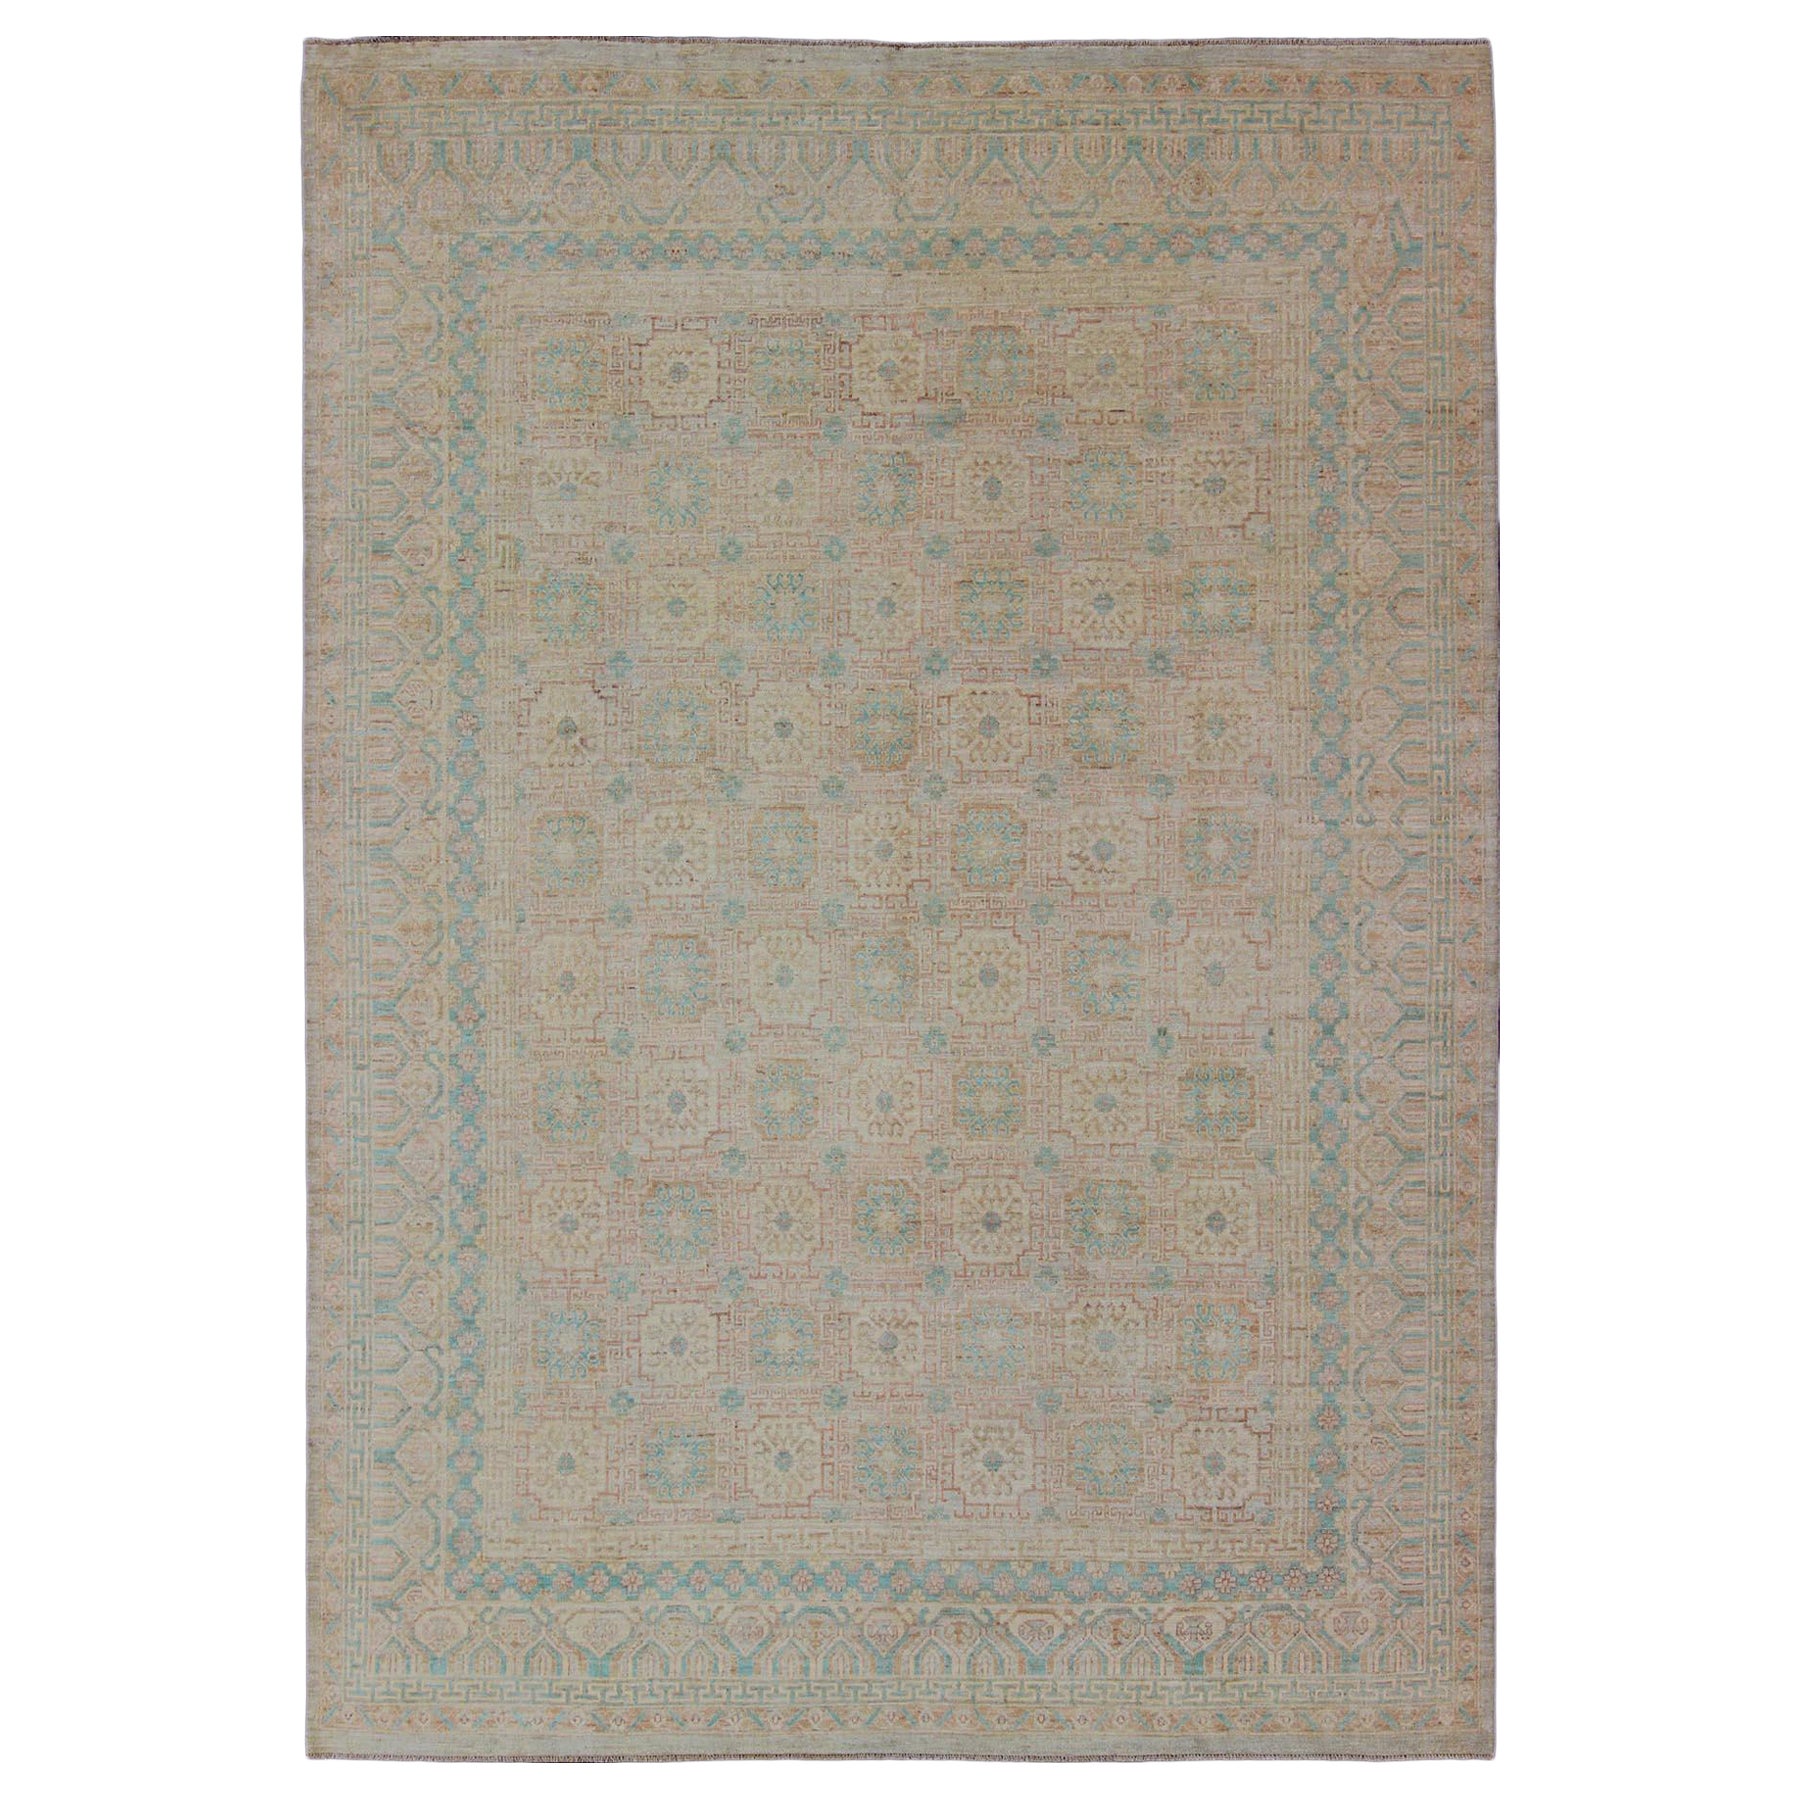 Khotan Design Rug with Geometric Medallions in Tan and Turquoise